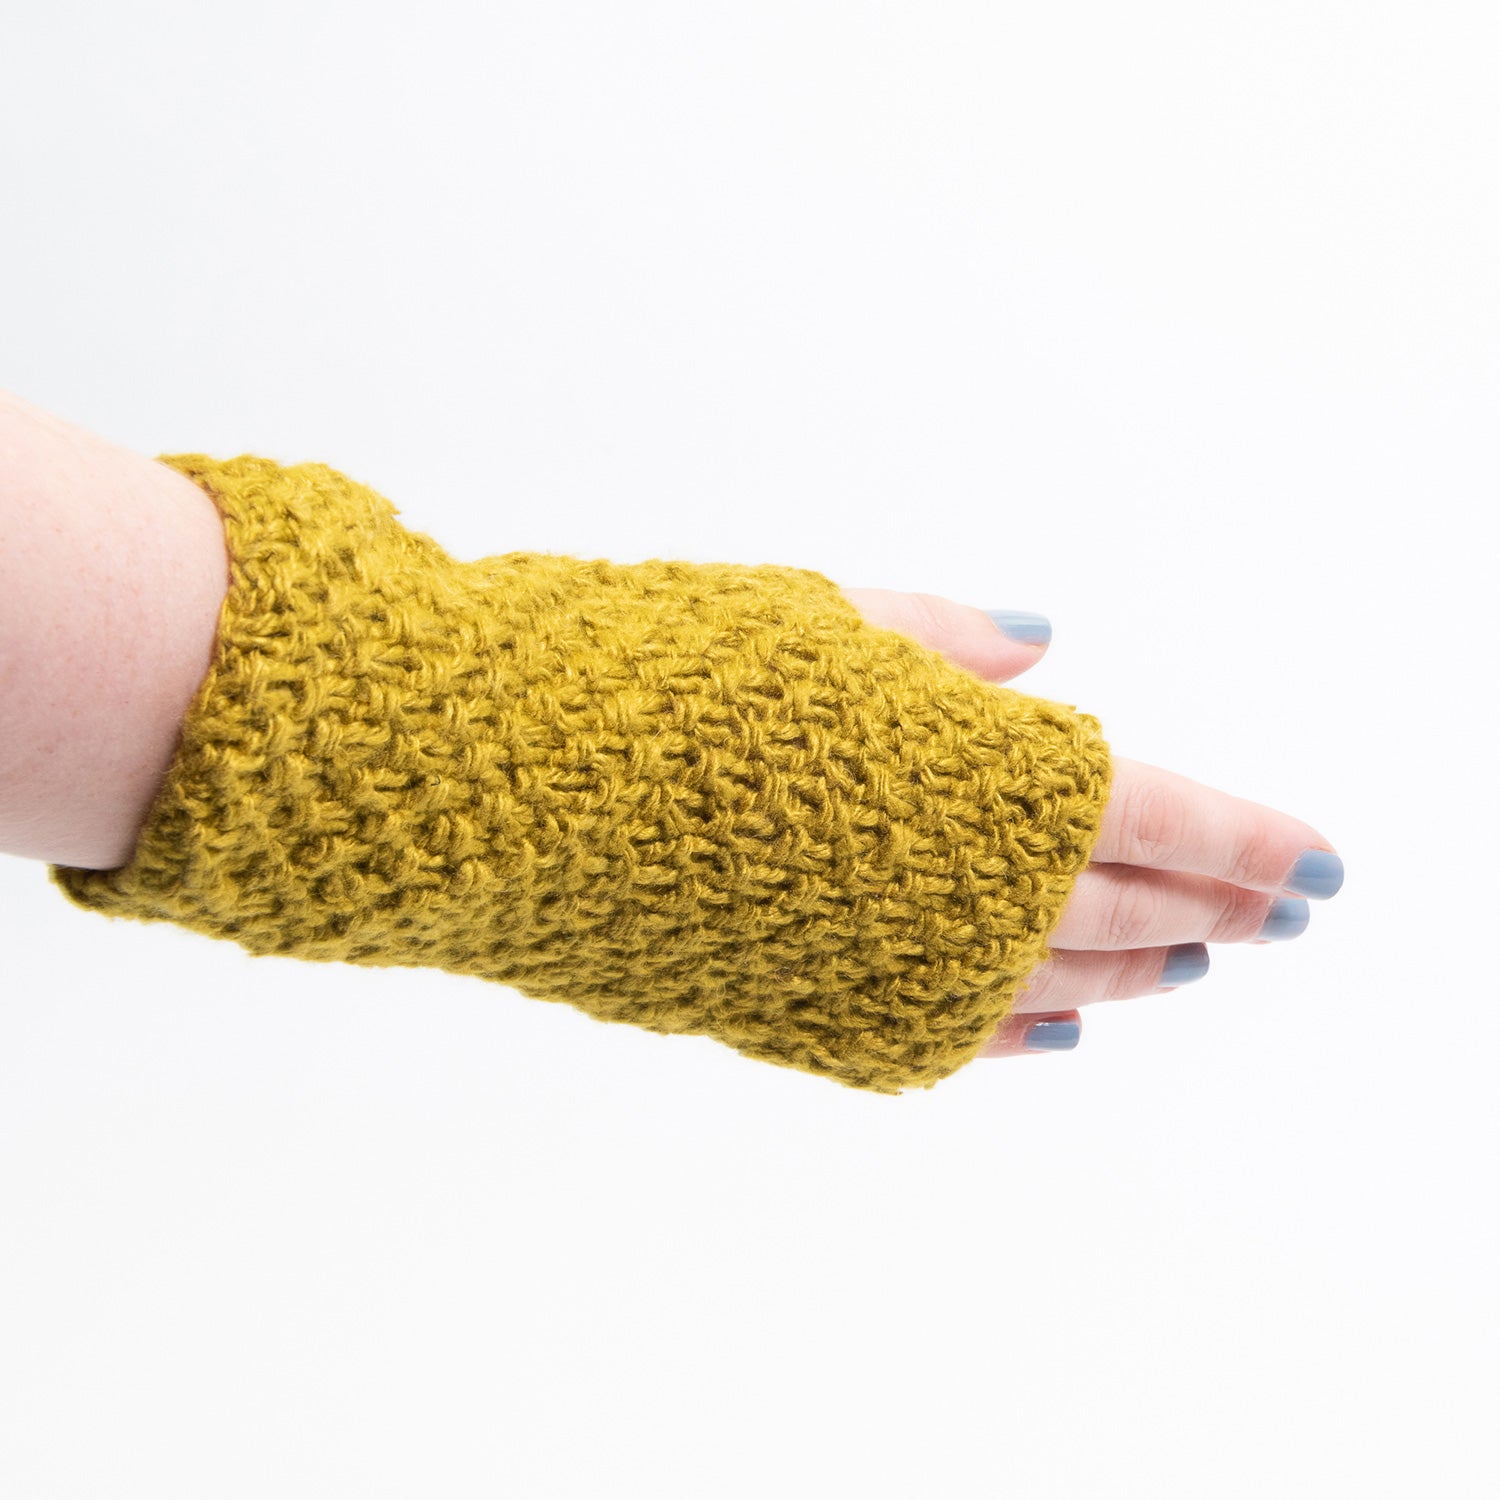 A mustard-yellow wristwarmer modelled on a hand, pictured on a white background.